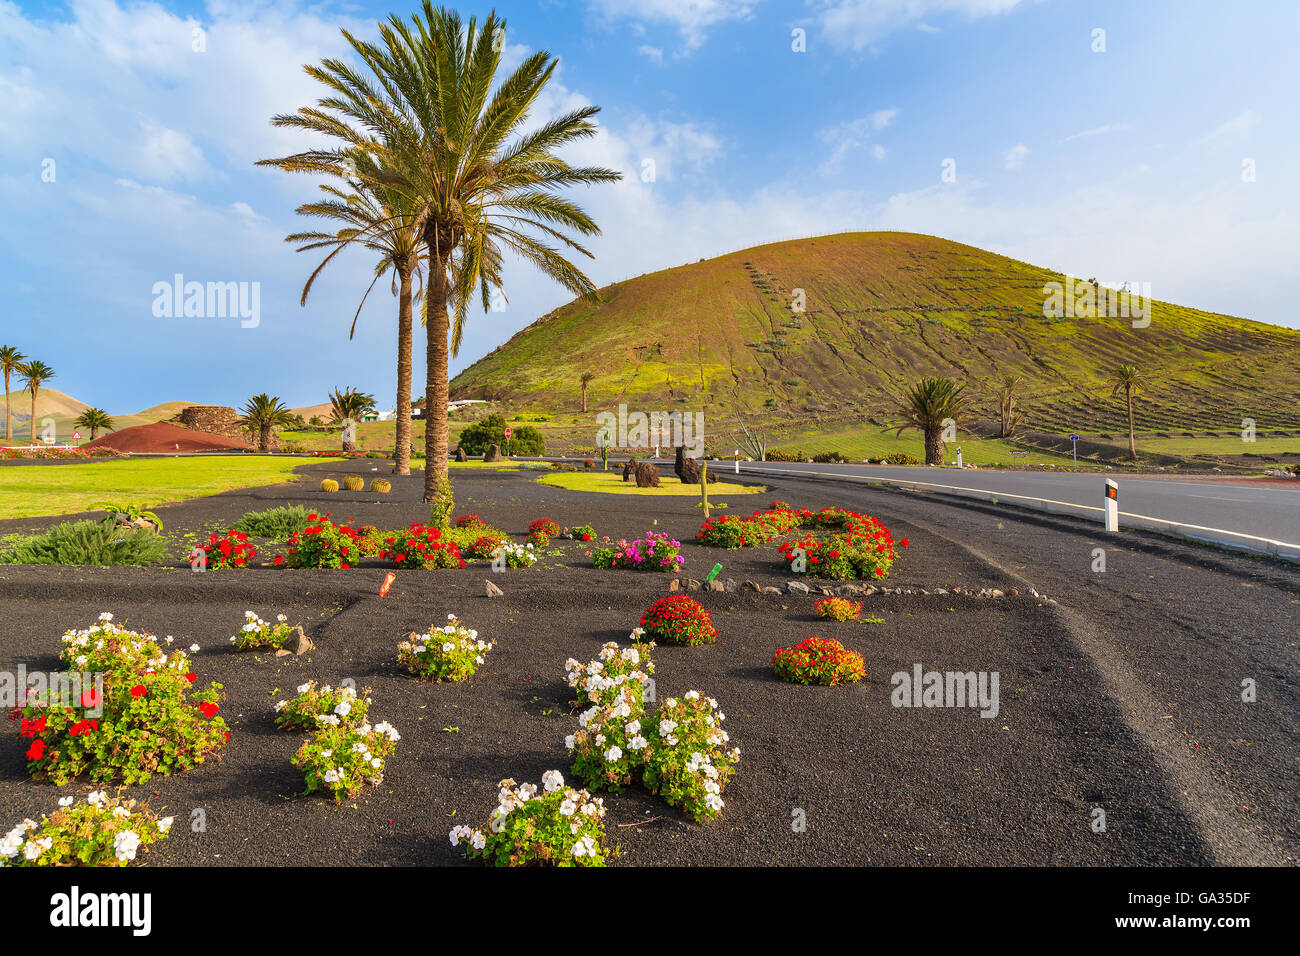 Flowers and palm tree along a road to Yaiza village, Lanzarote island, Spain Stock Photo